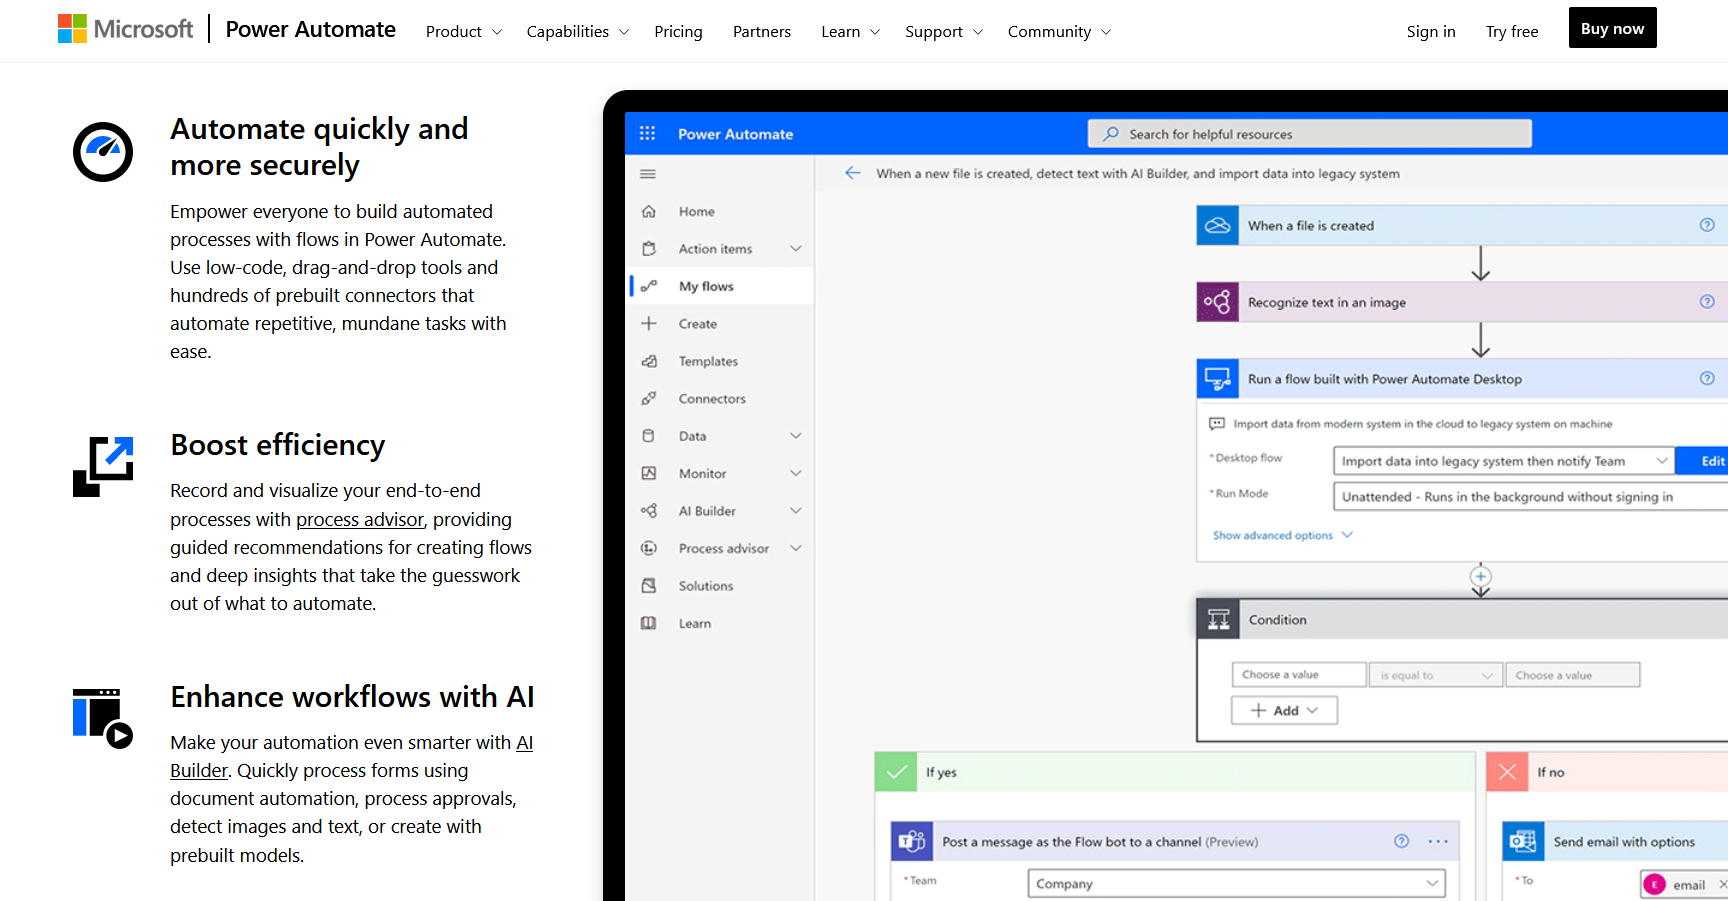 Microsoft Power Automate RPA Software Features